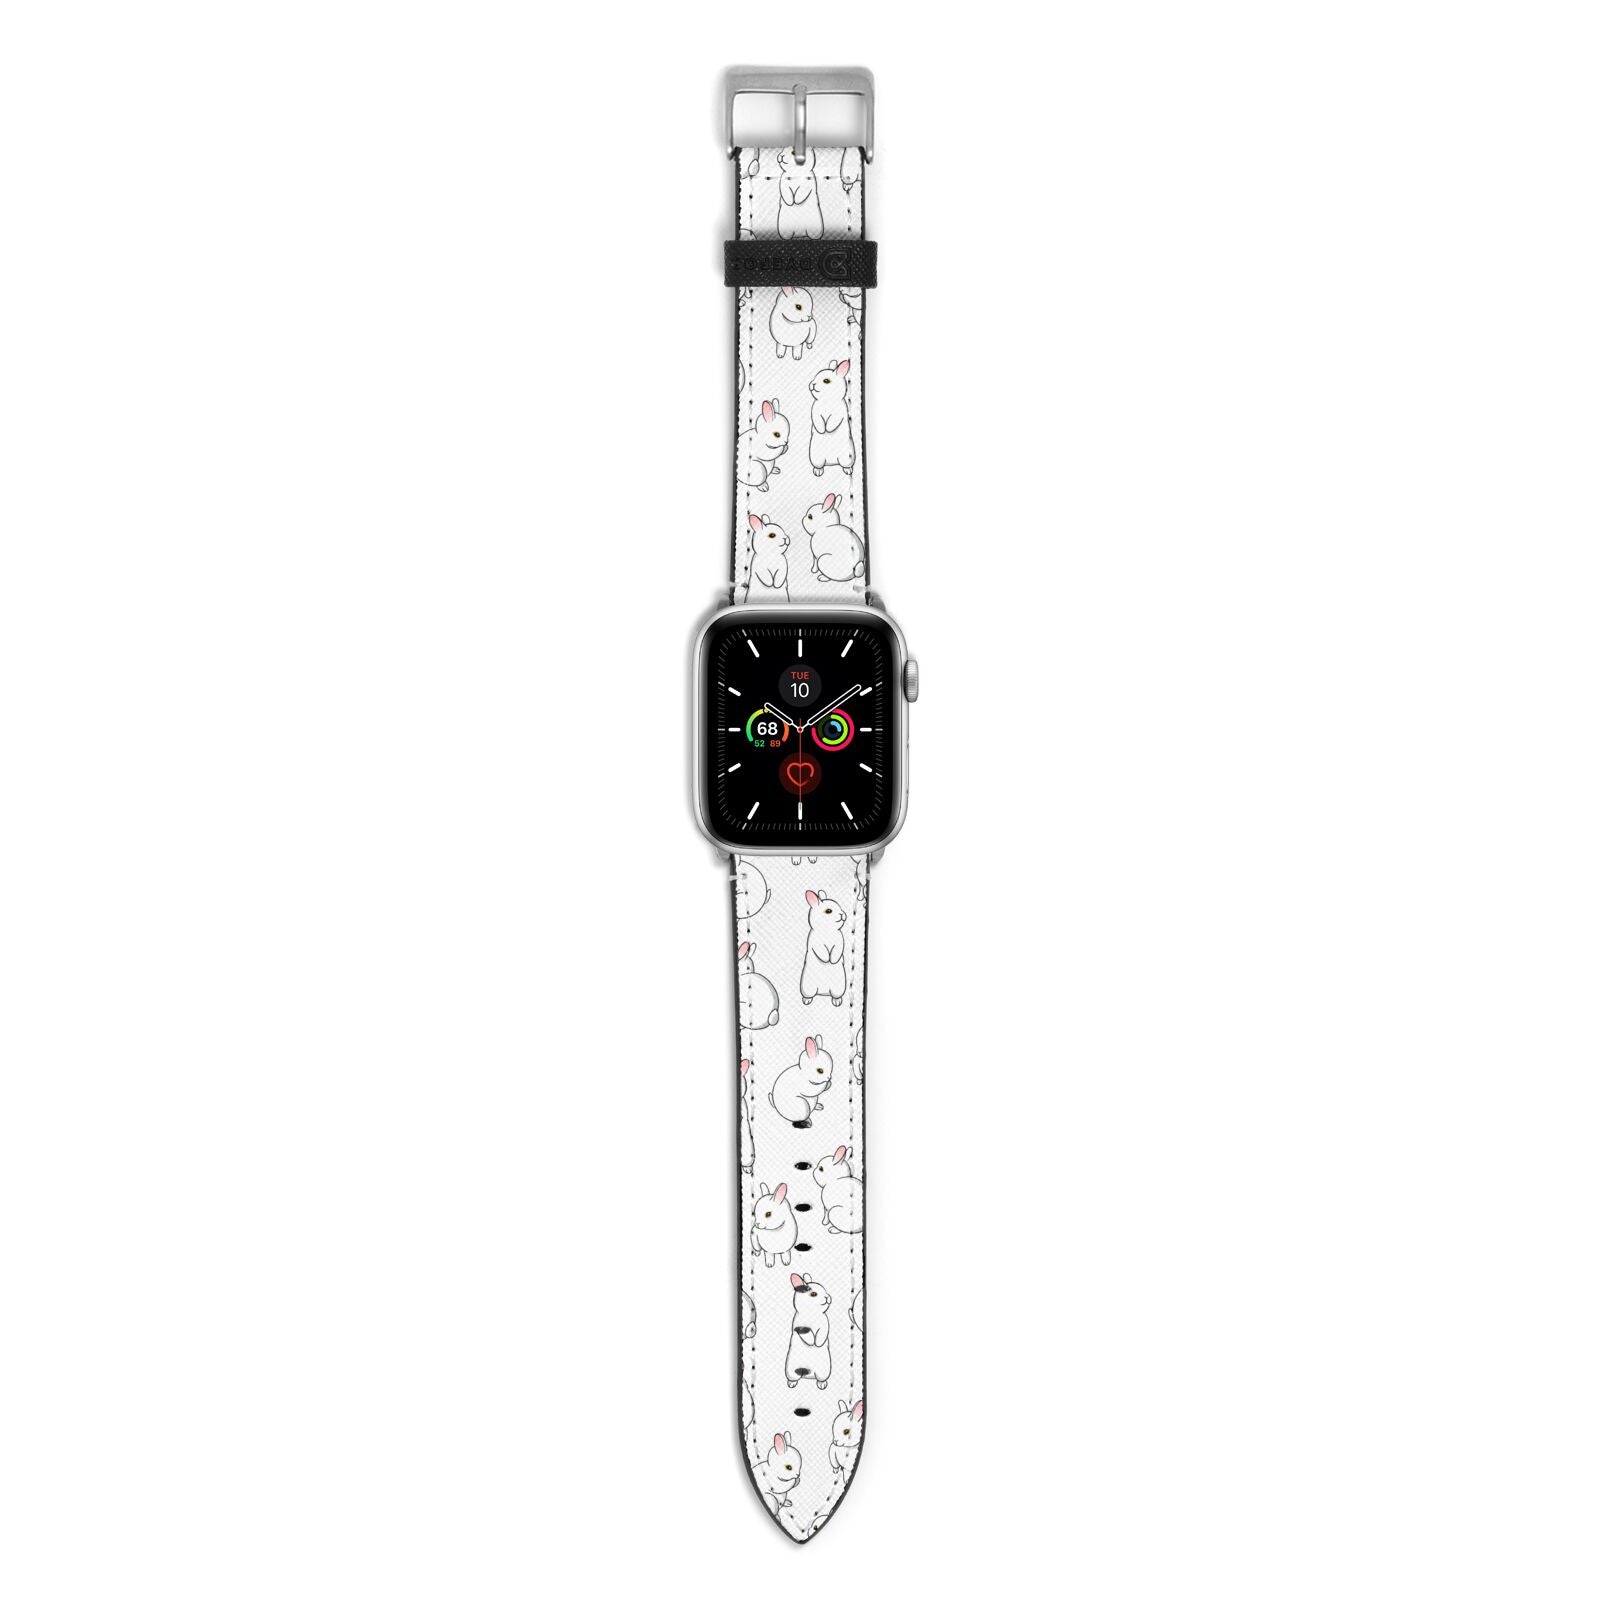 Bunny Rabbit Apple Watch Strap with Silver Hardware